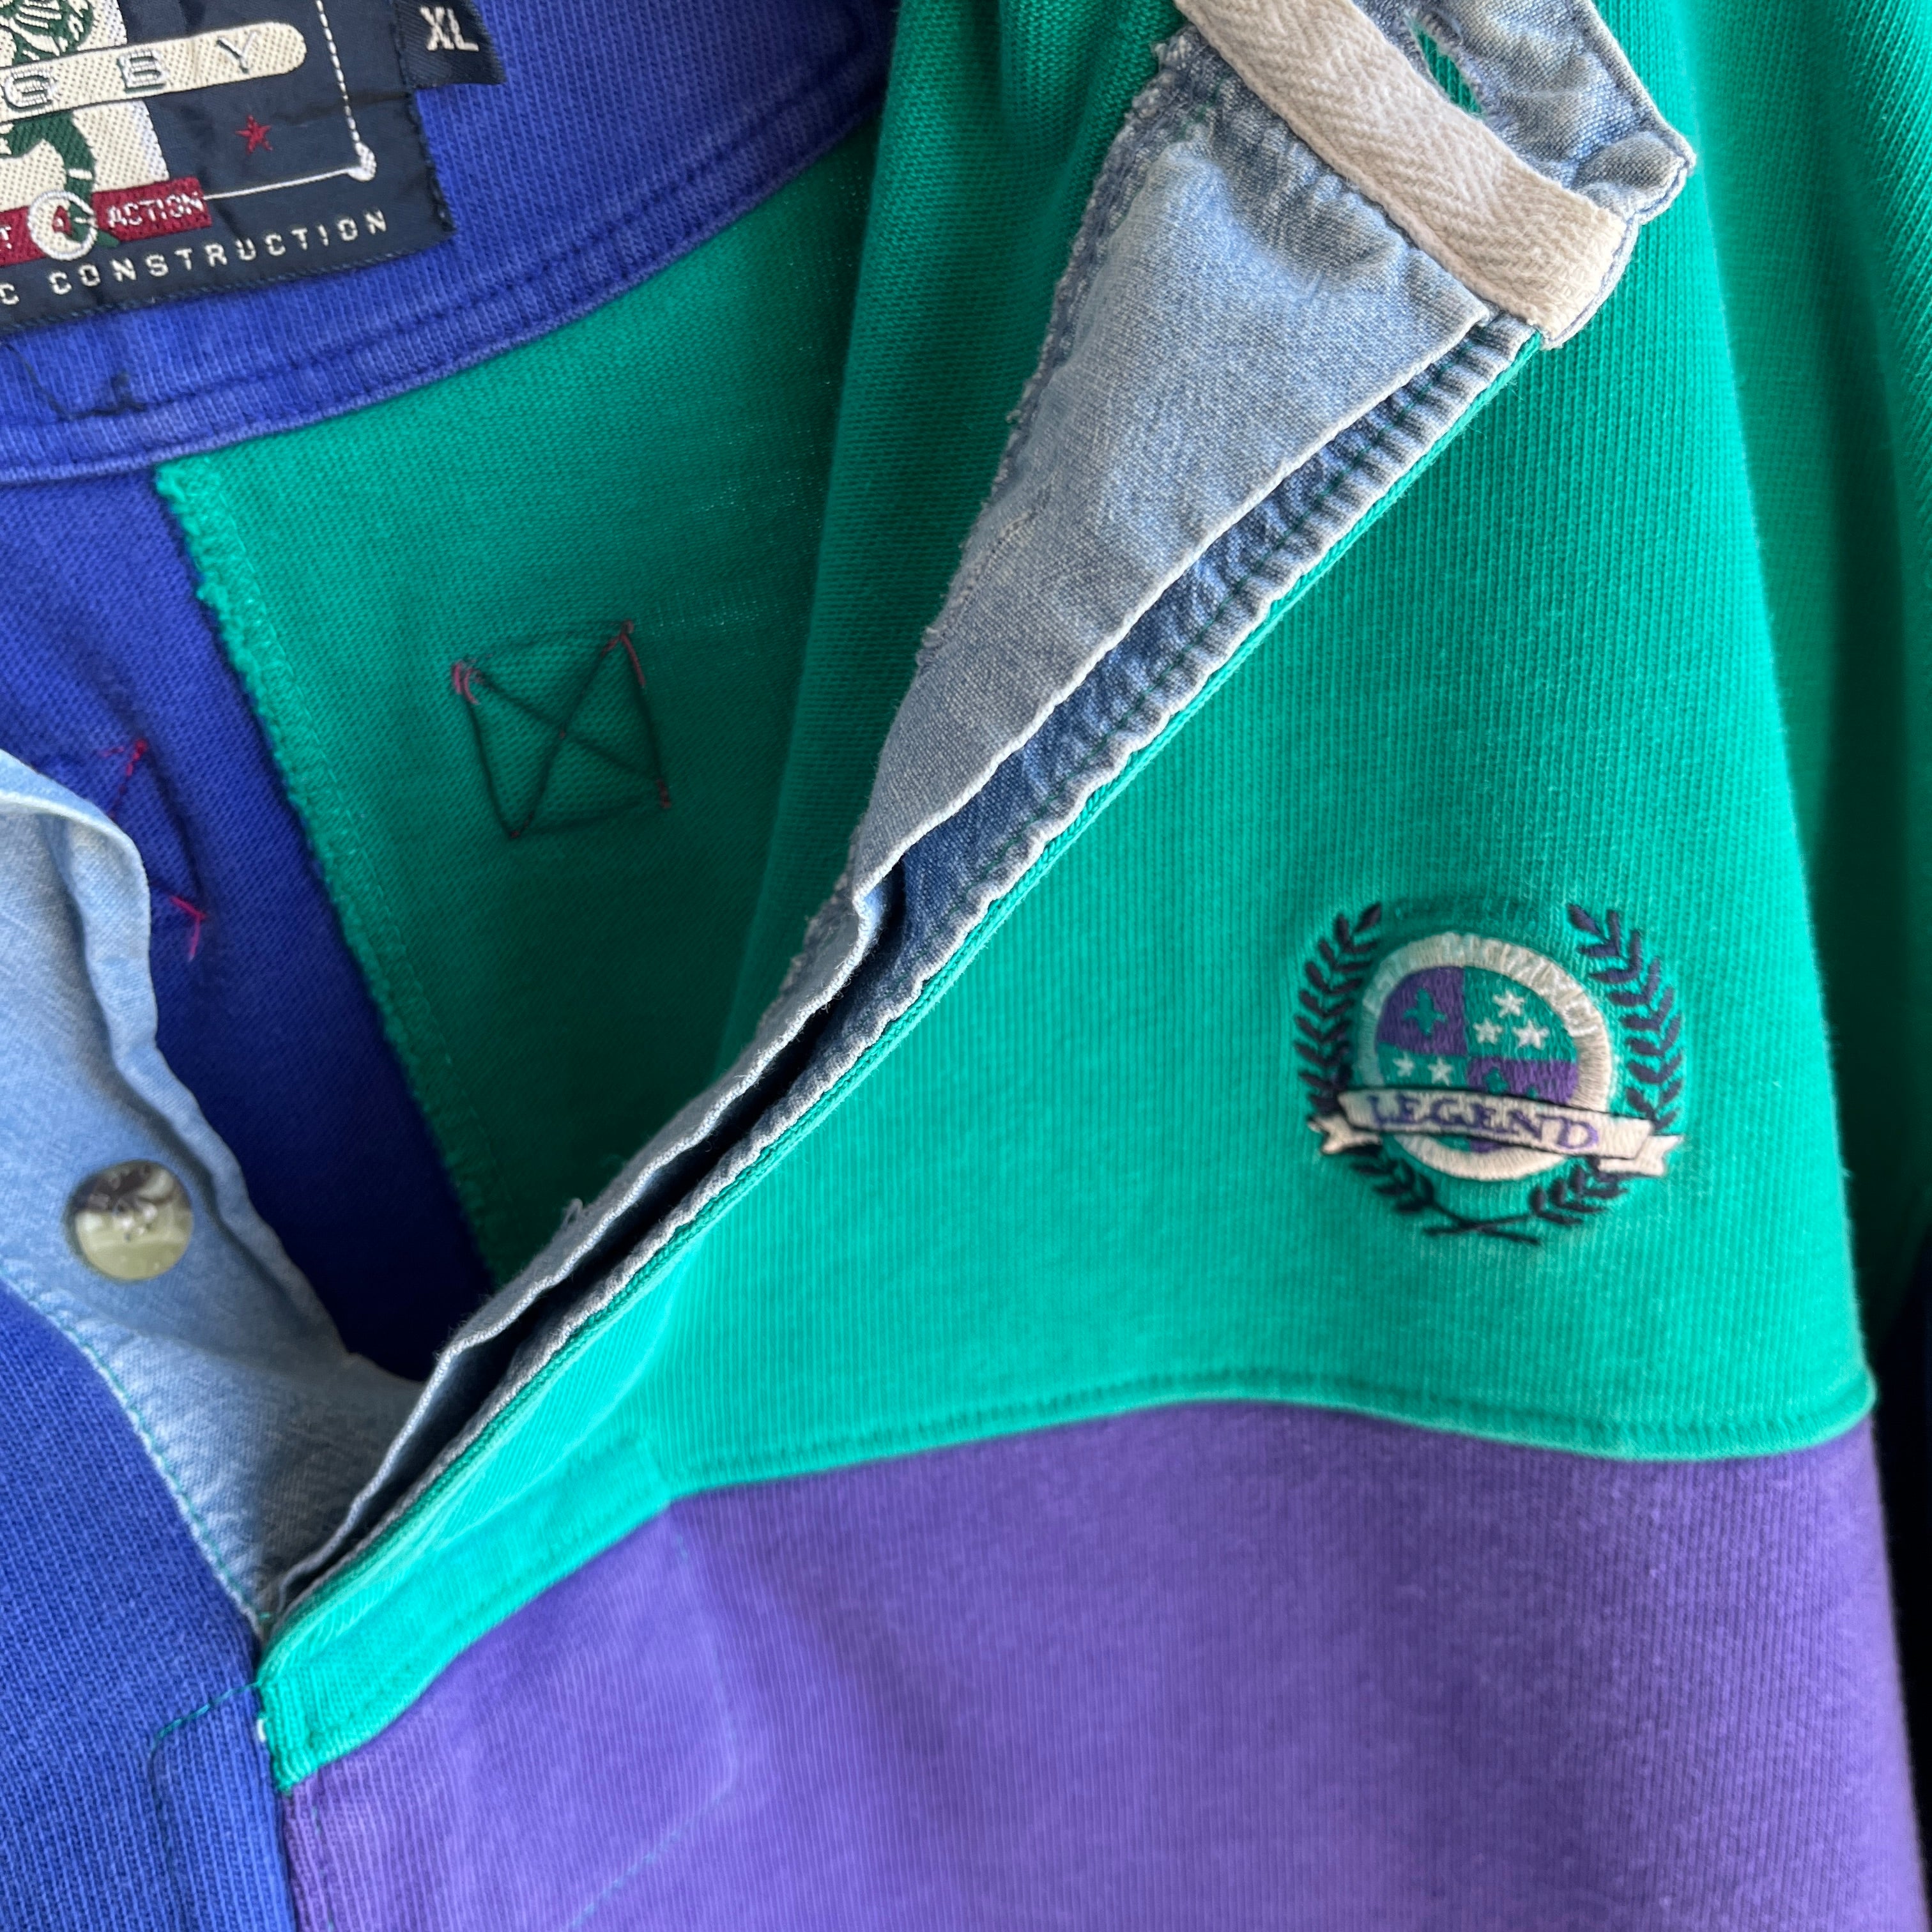 1990s Fresh Prince Style Color Block Rugby Shirt